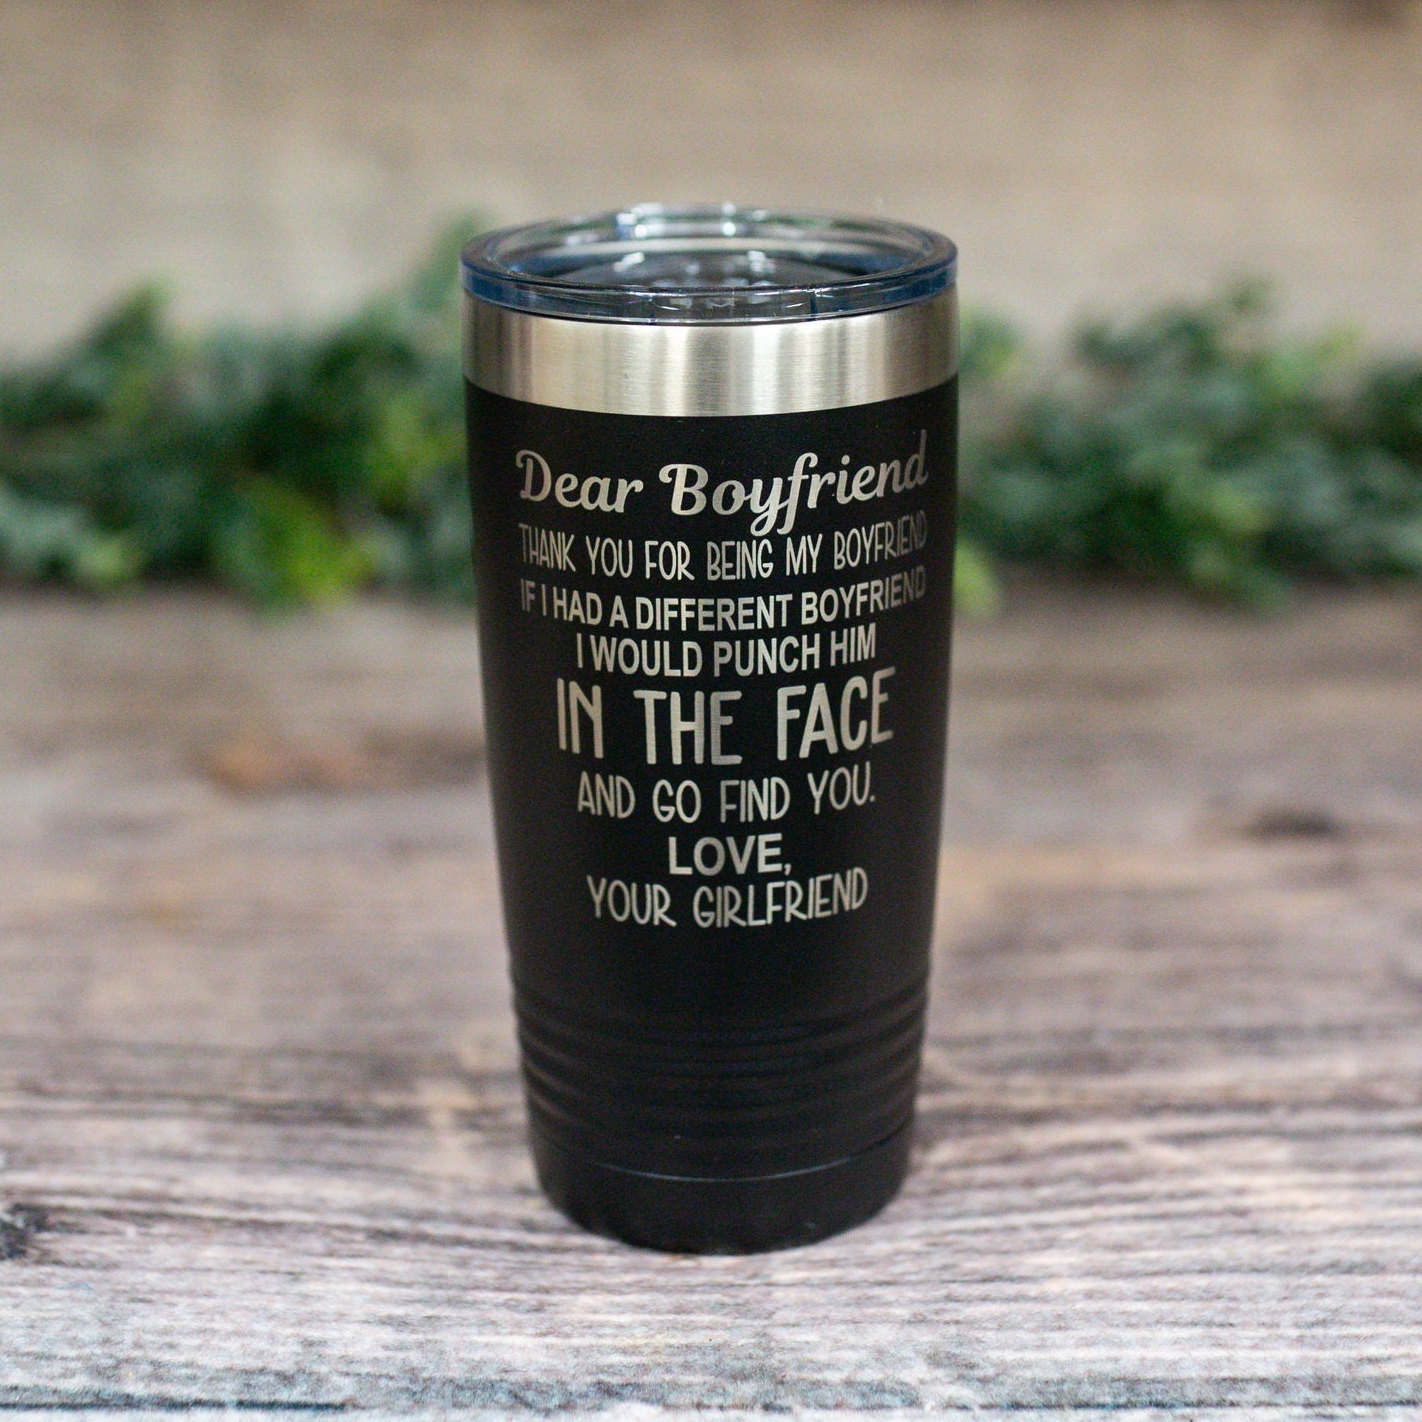 https://3cetching.com/wp-content/uploads/2021/07/dear-boyfriend-personalized-engraved-tumbler-with-girlfriend-name-valentines-day-gift-funny-significant-other-mug-60f73fb1.jpg